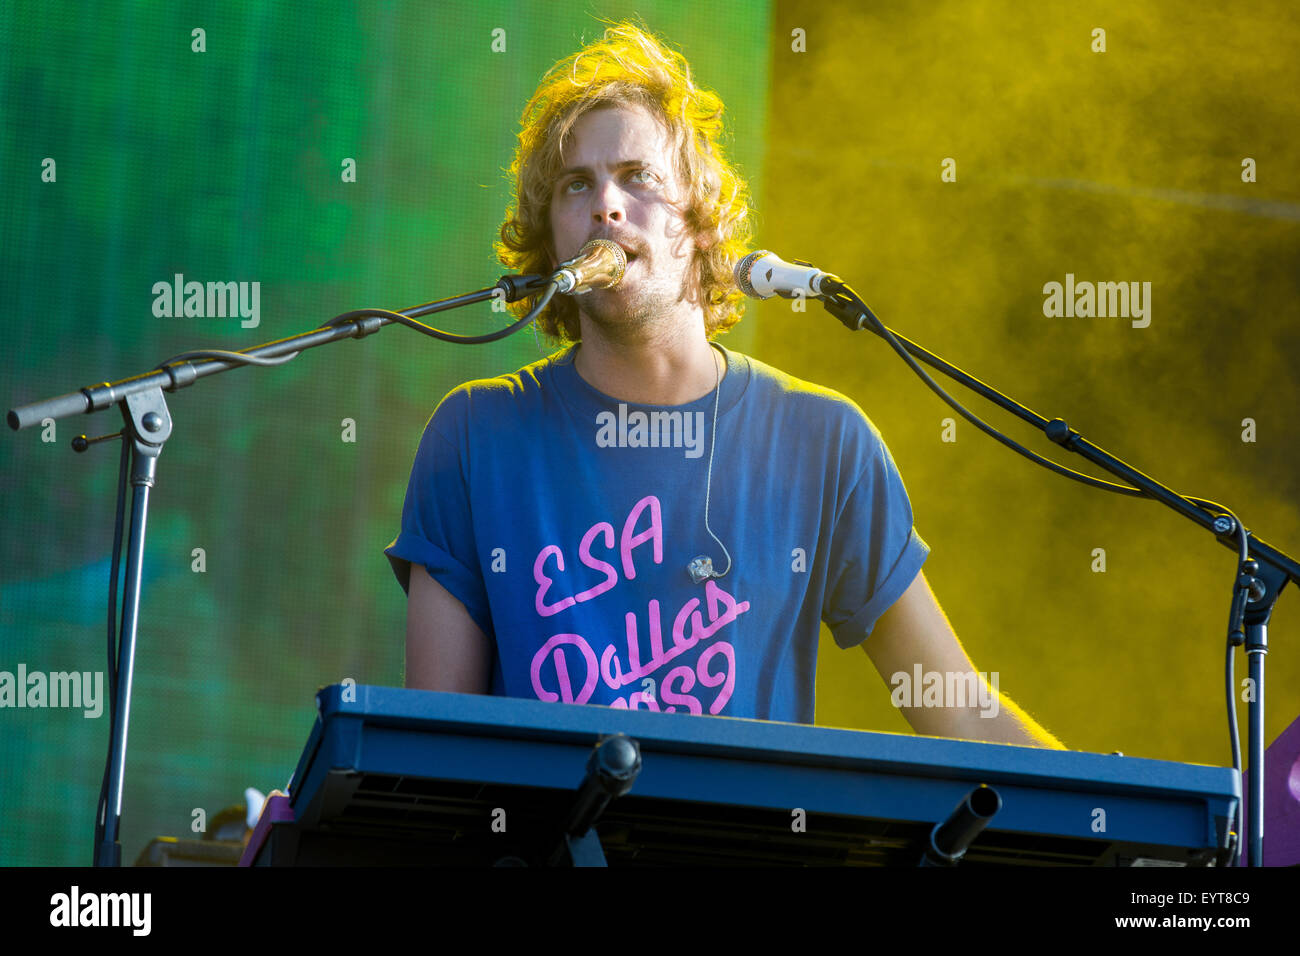 Chicago, Illinois, USA. 1st Aug, 2015. Musician JAY WATSON of Tame Impala  performs live in Grant